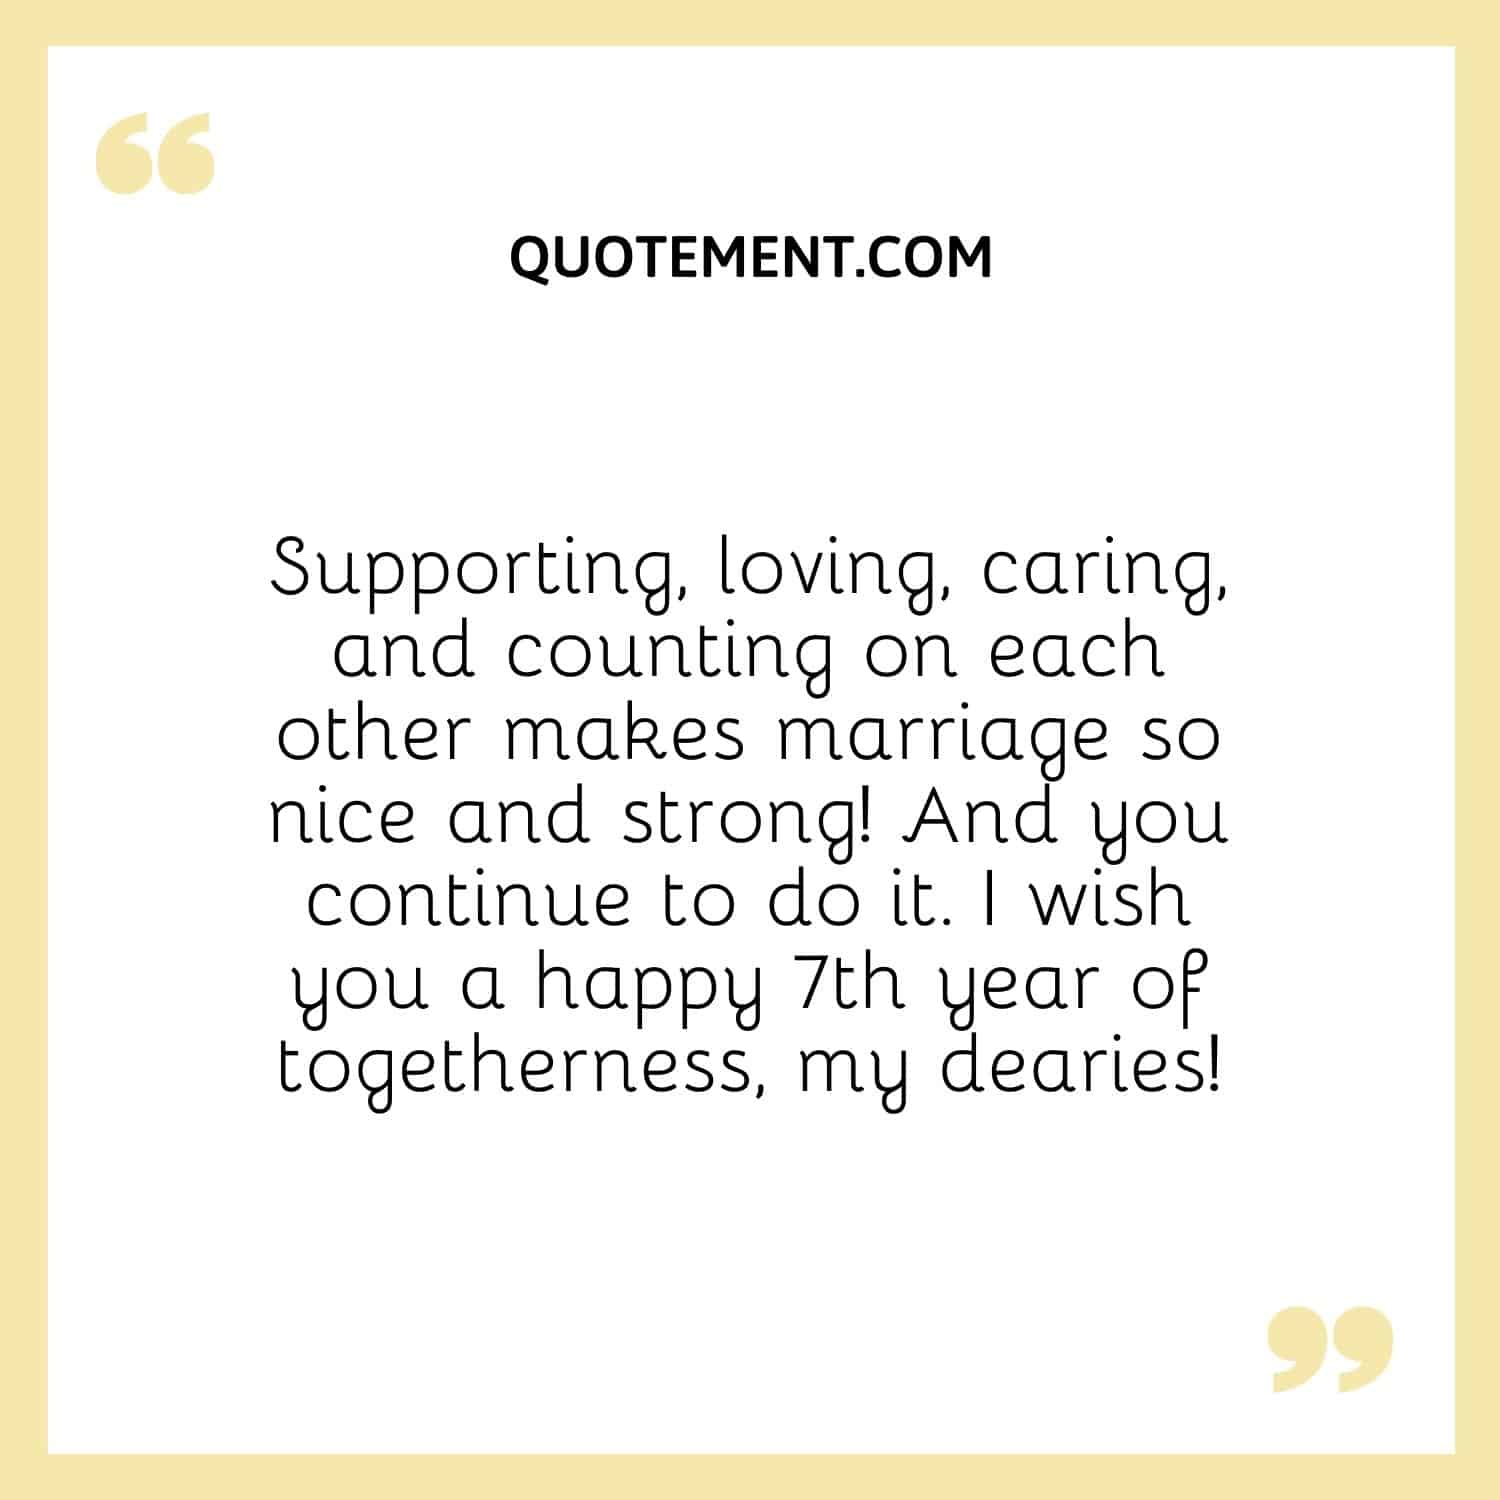 Supporting, loving, caring, and counting on each other makes marriage so nice and strong